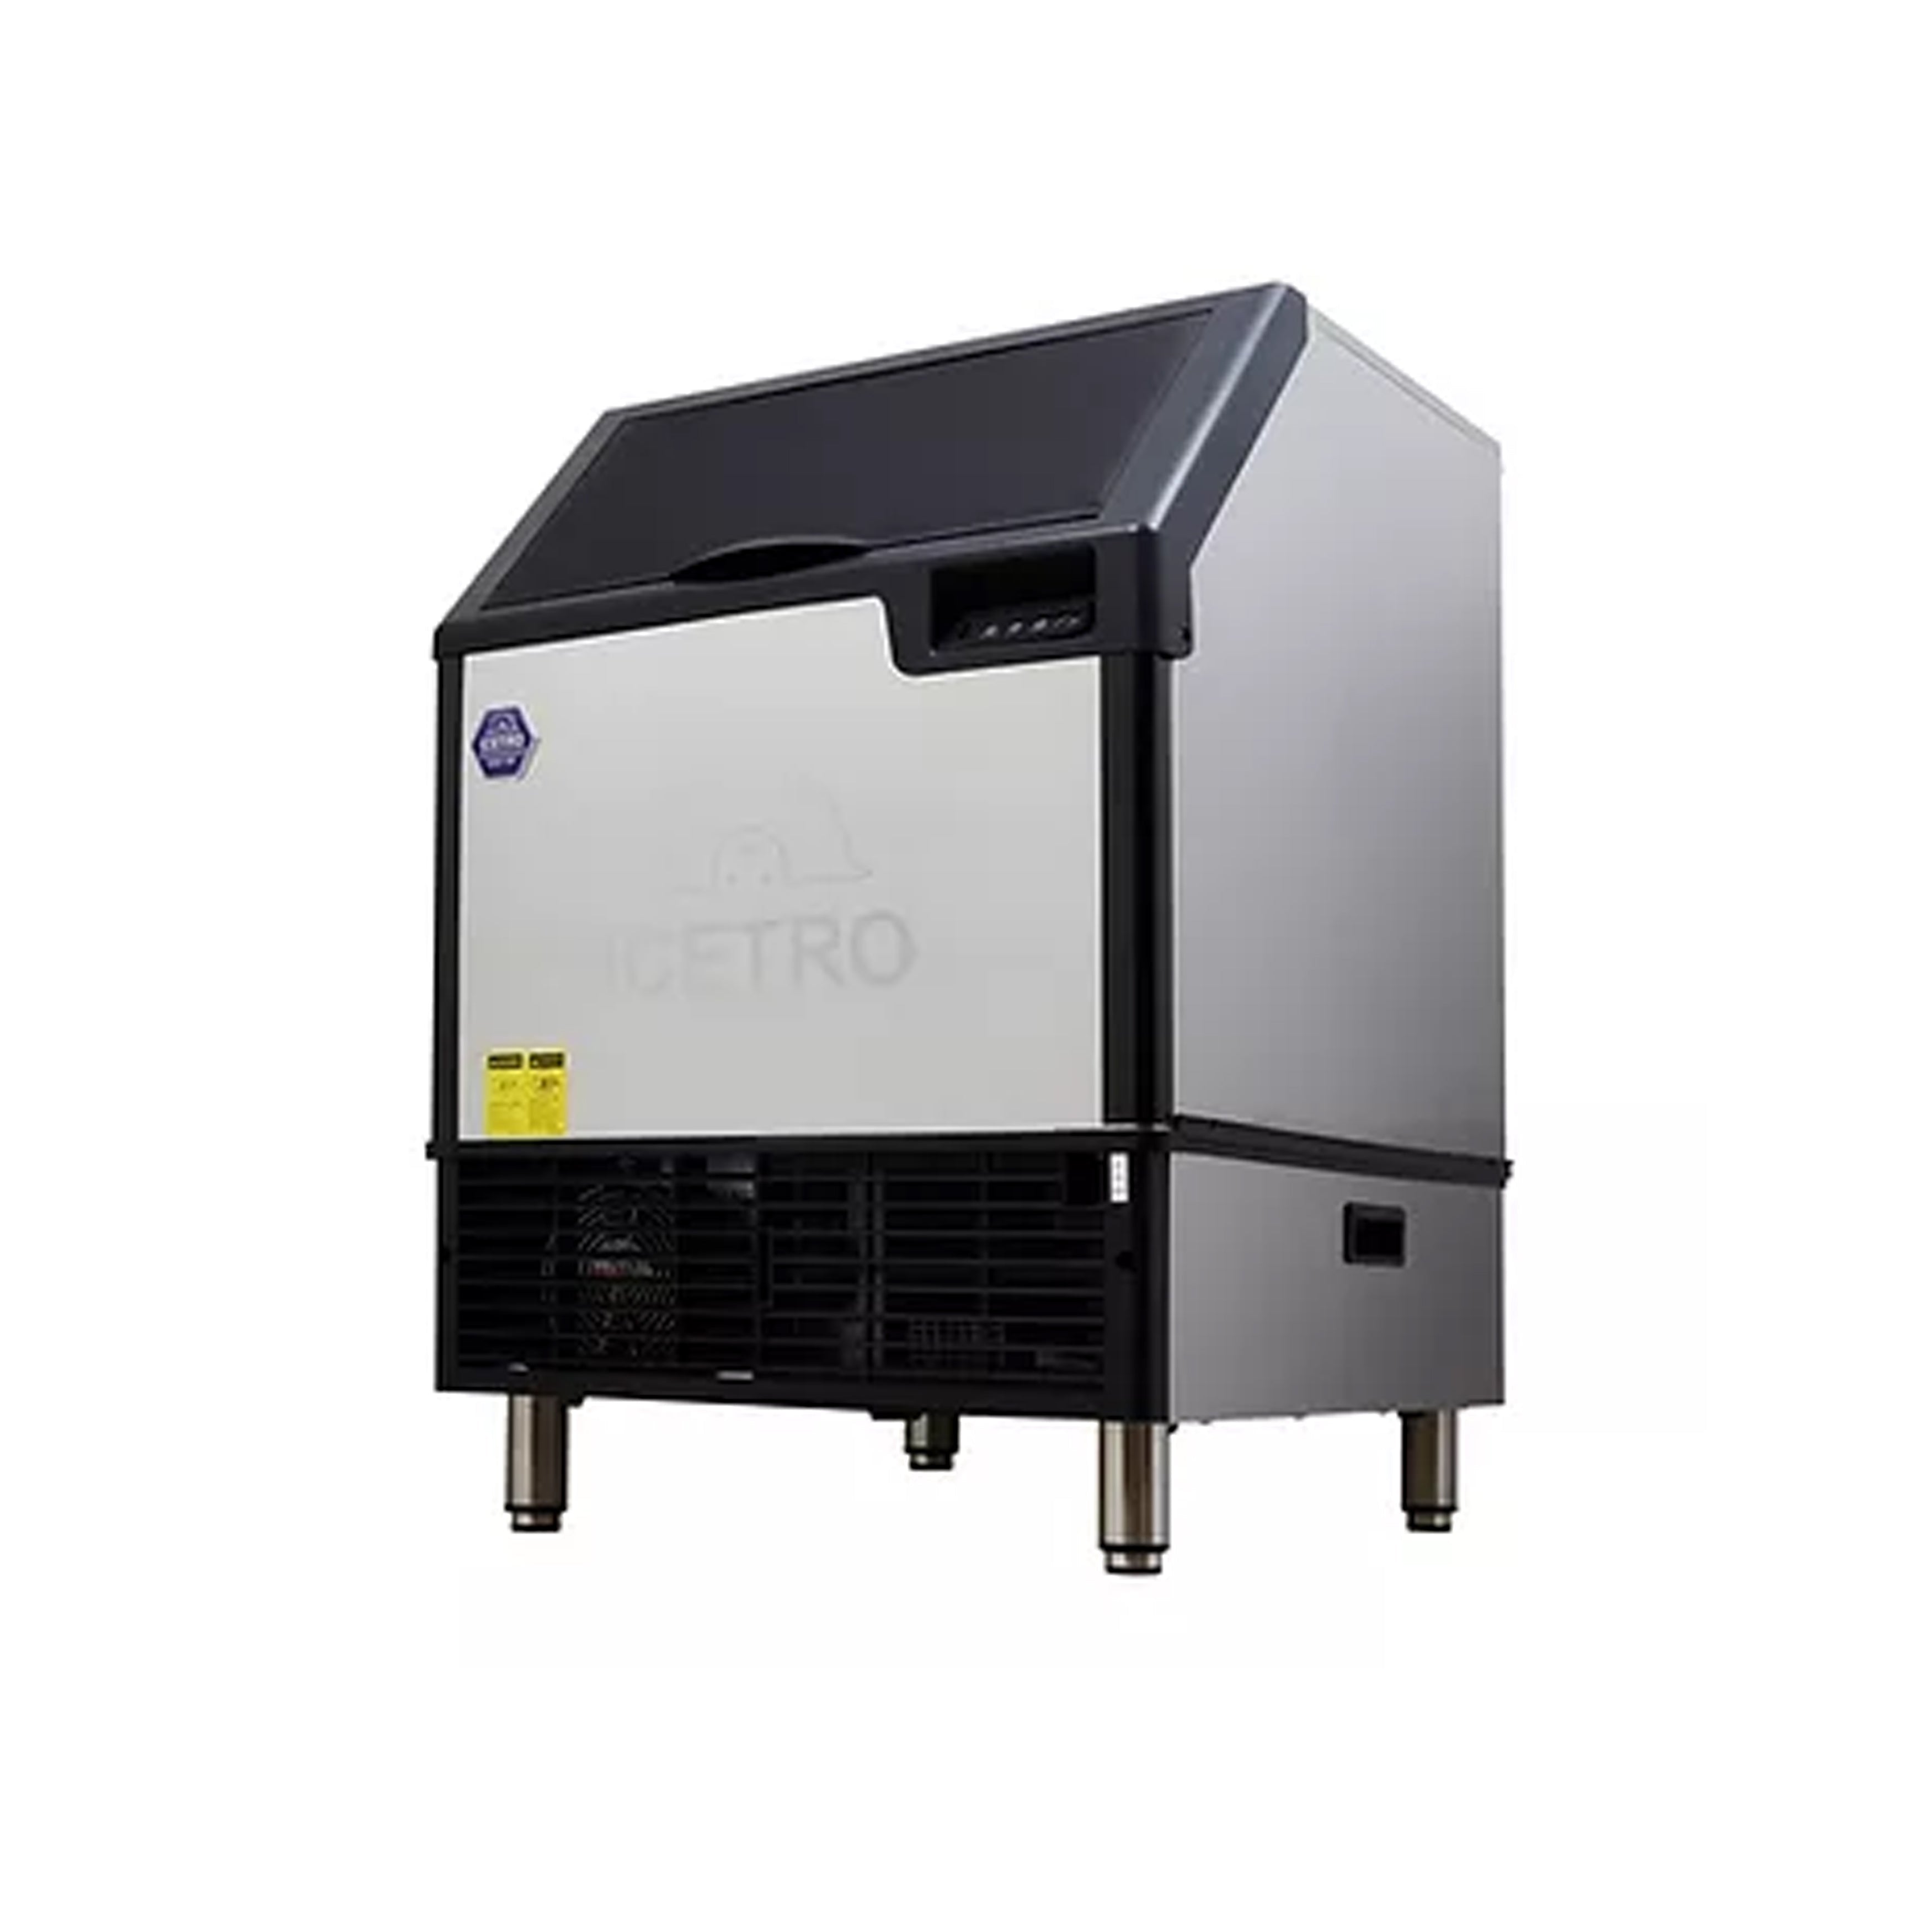 Icetro - IU-0170-AH, Commercial 77lbs Undercounter Air Cooled Ice Machine Half Cube Maker